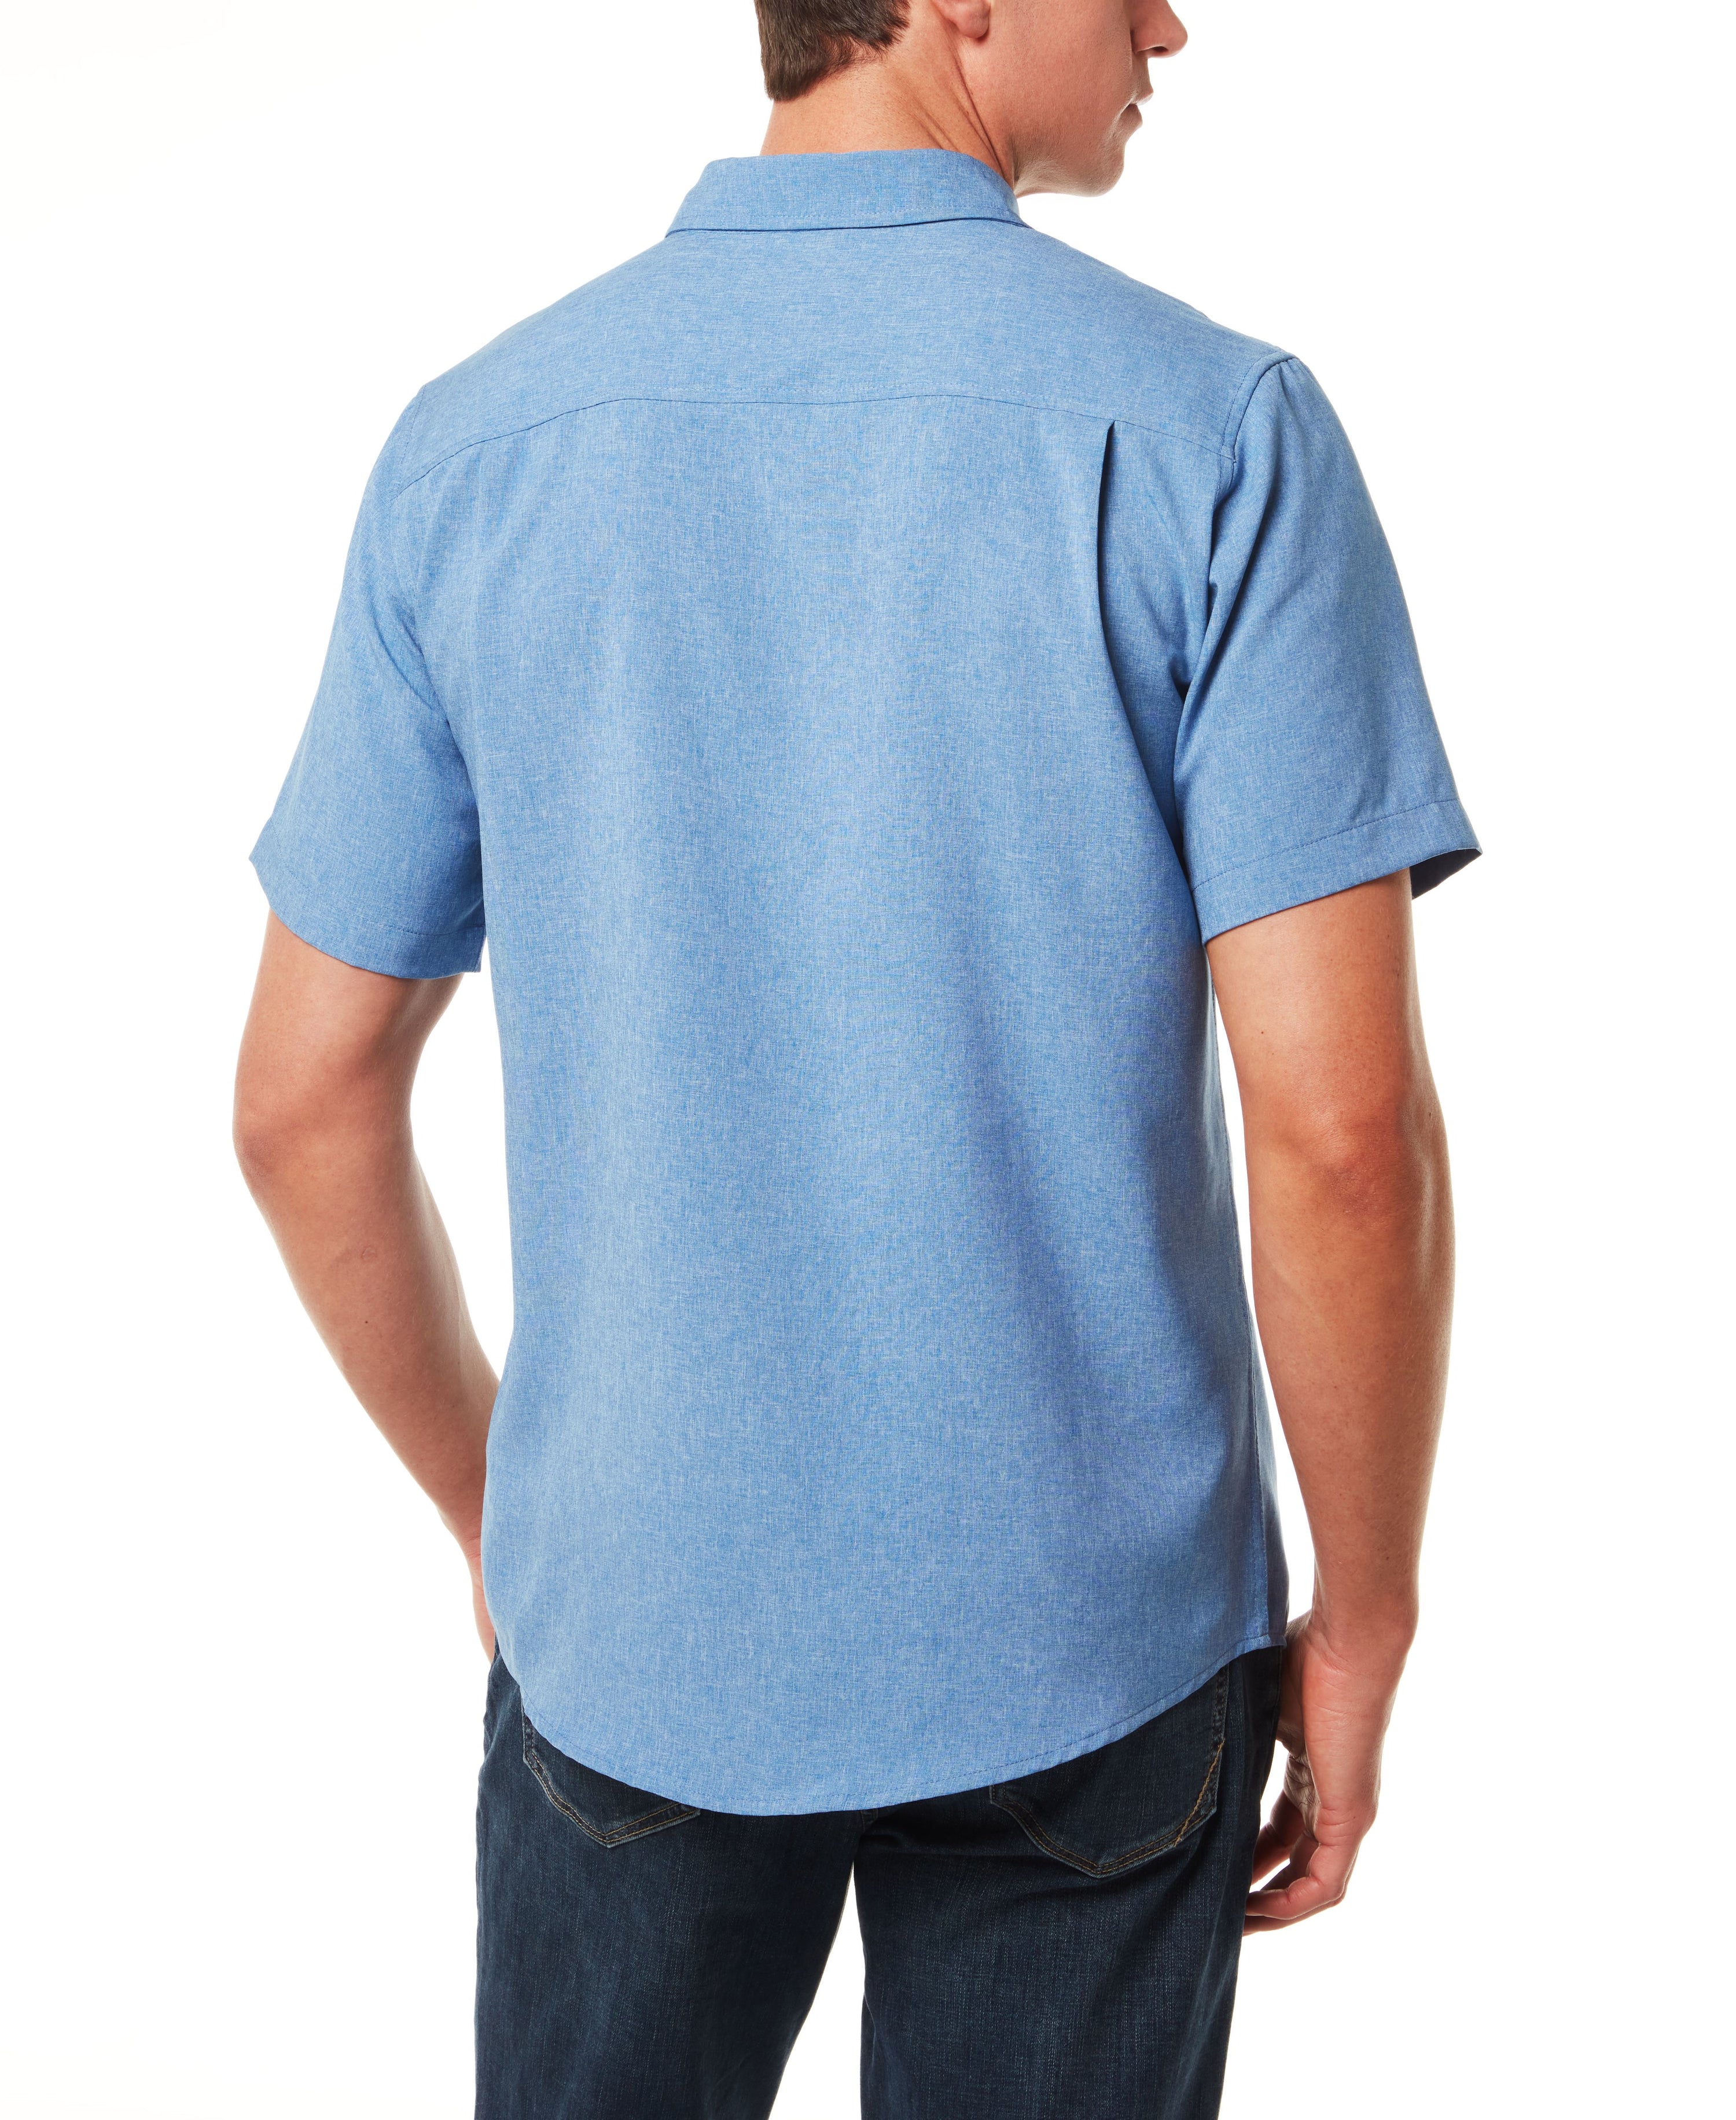 Performance Shirt in Federal Blue